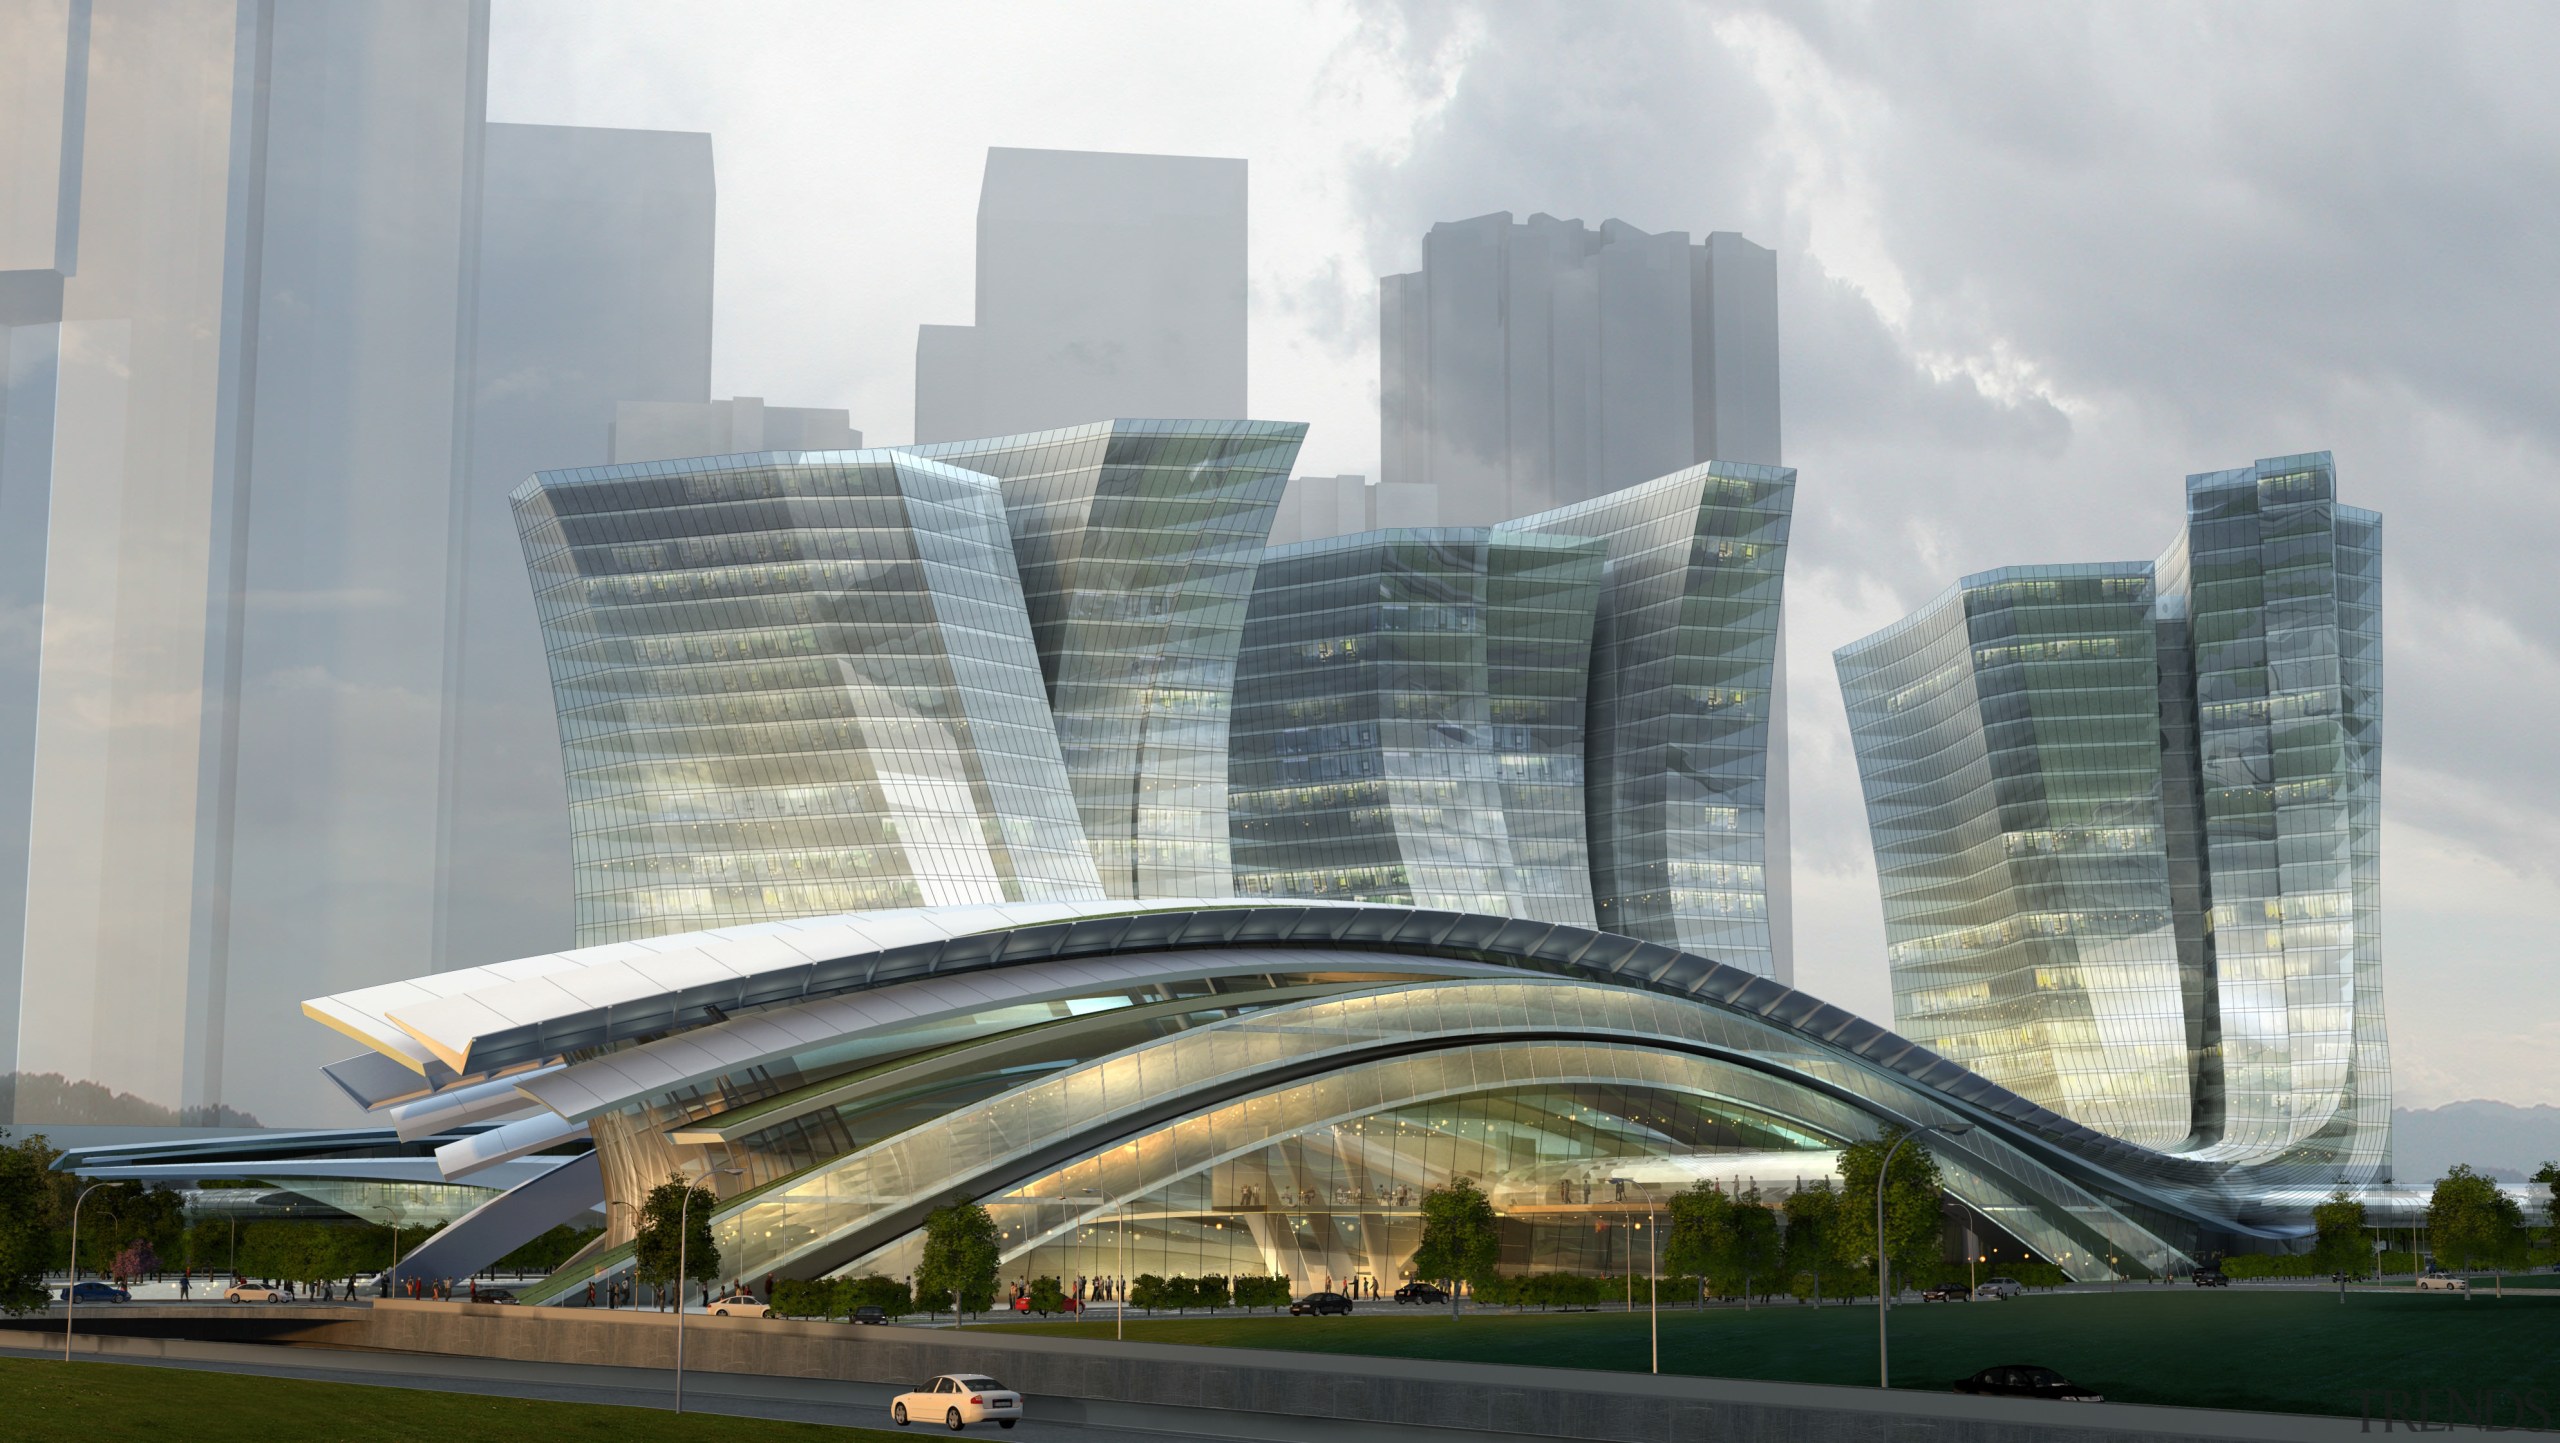 Conceptual image of the West Kowloon Terminus which architecture, building, city, cityscape, commercial building, condominium, corporate headquarters, daytime, downtown, fixed link, headquarters, landmark, metropolis, metropolitan area, mixed use, overpass, sky, skyscraper, skyway, tower block, urban area, gray